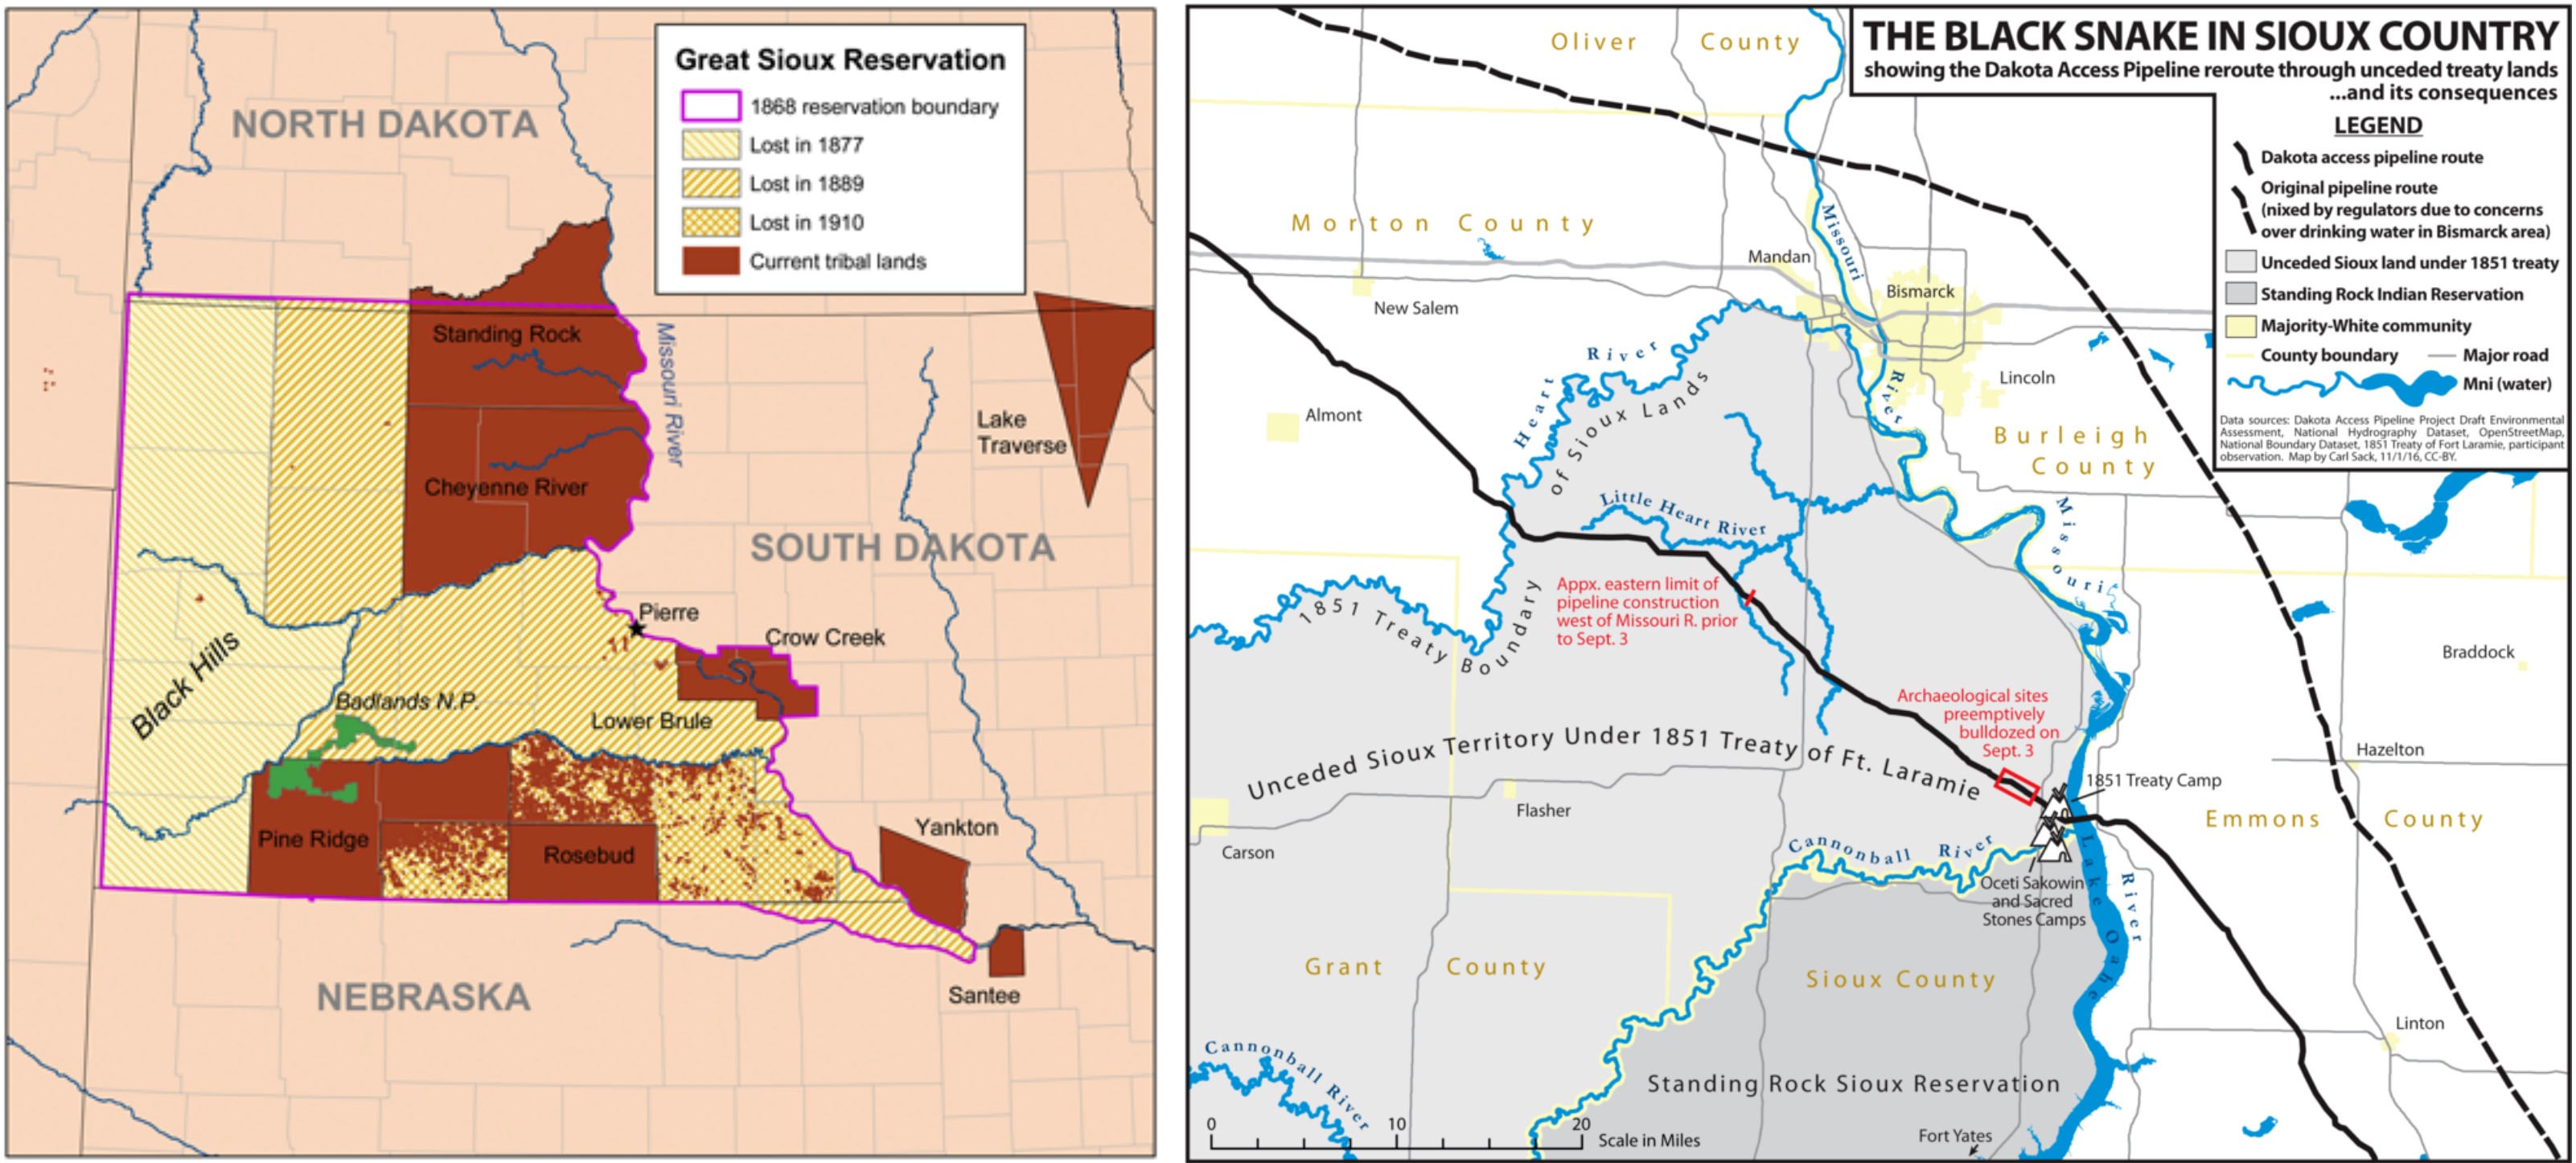 On the left, a map of the Great Sioux Reservation and the land lost by the Sioux since 1868. On the right, a map of the Dakota Access Pipeline route and the original pipeline route.